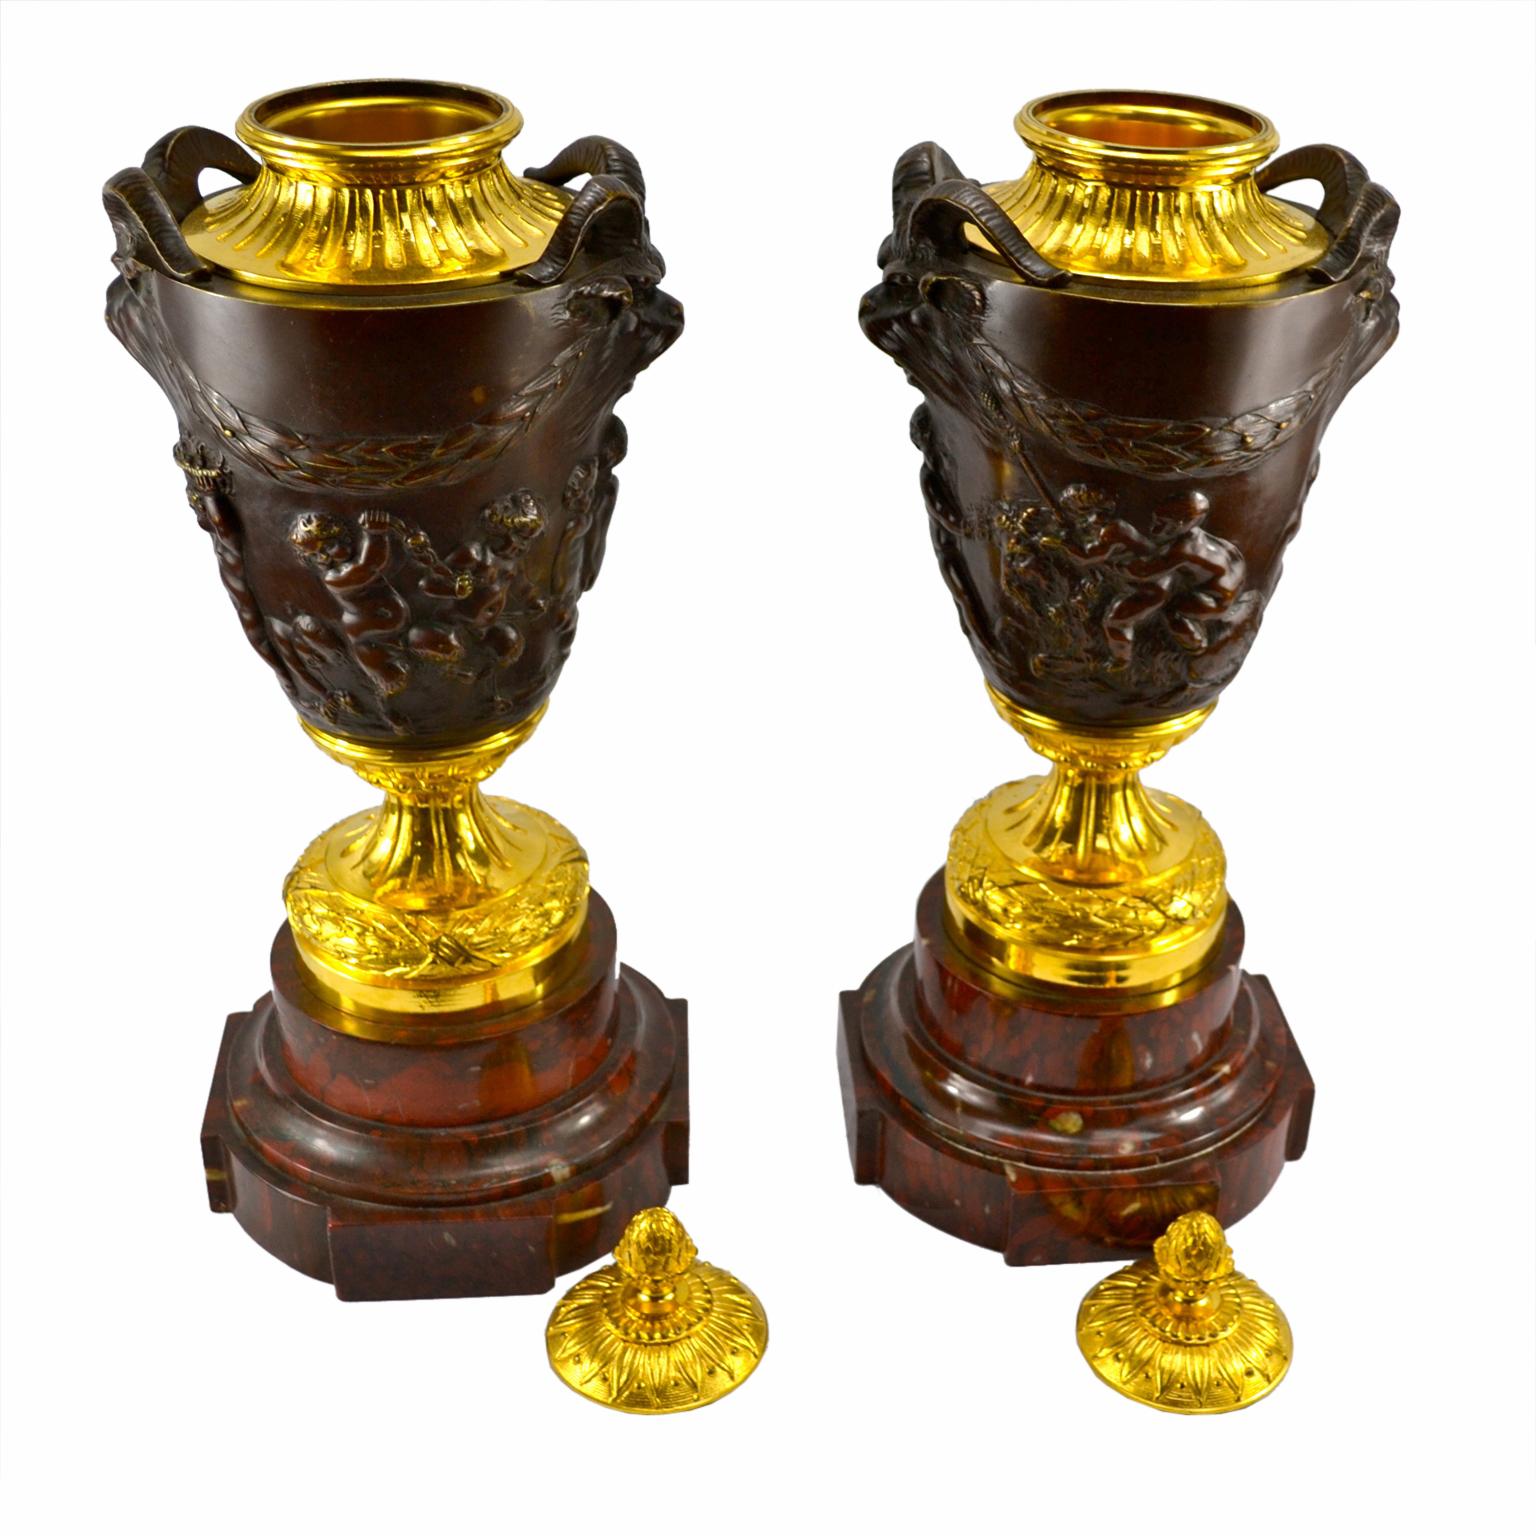 A pair of 19th century French lidded gilt bronze and patinated bronze urns after a popular model by the 18th century sculptor Clodion. The lids and circular urn bases are gilded and sit on a circular stepped griotte marble base. The patinated body